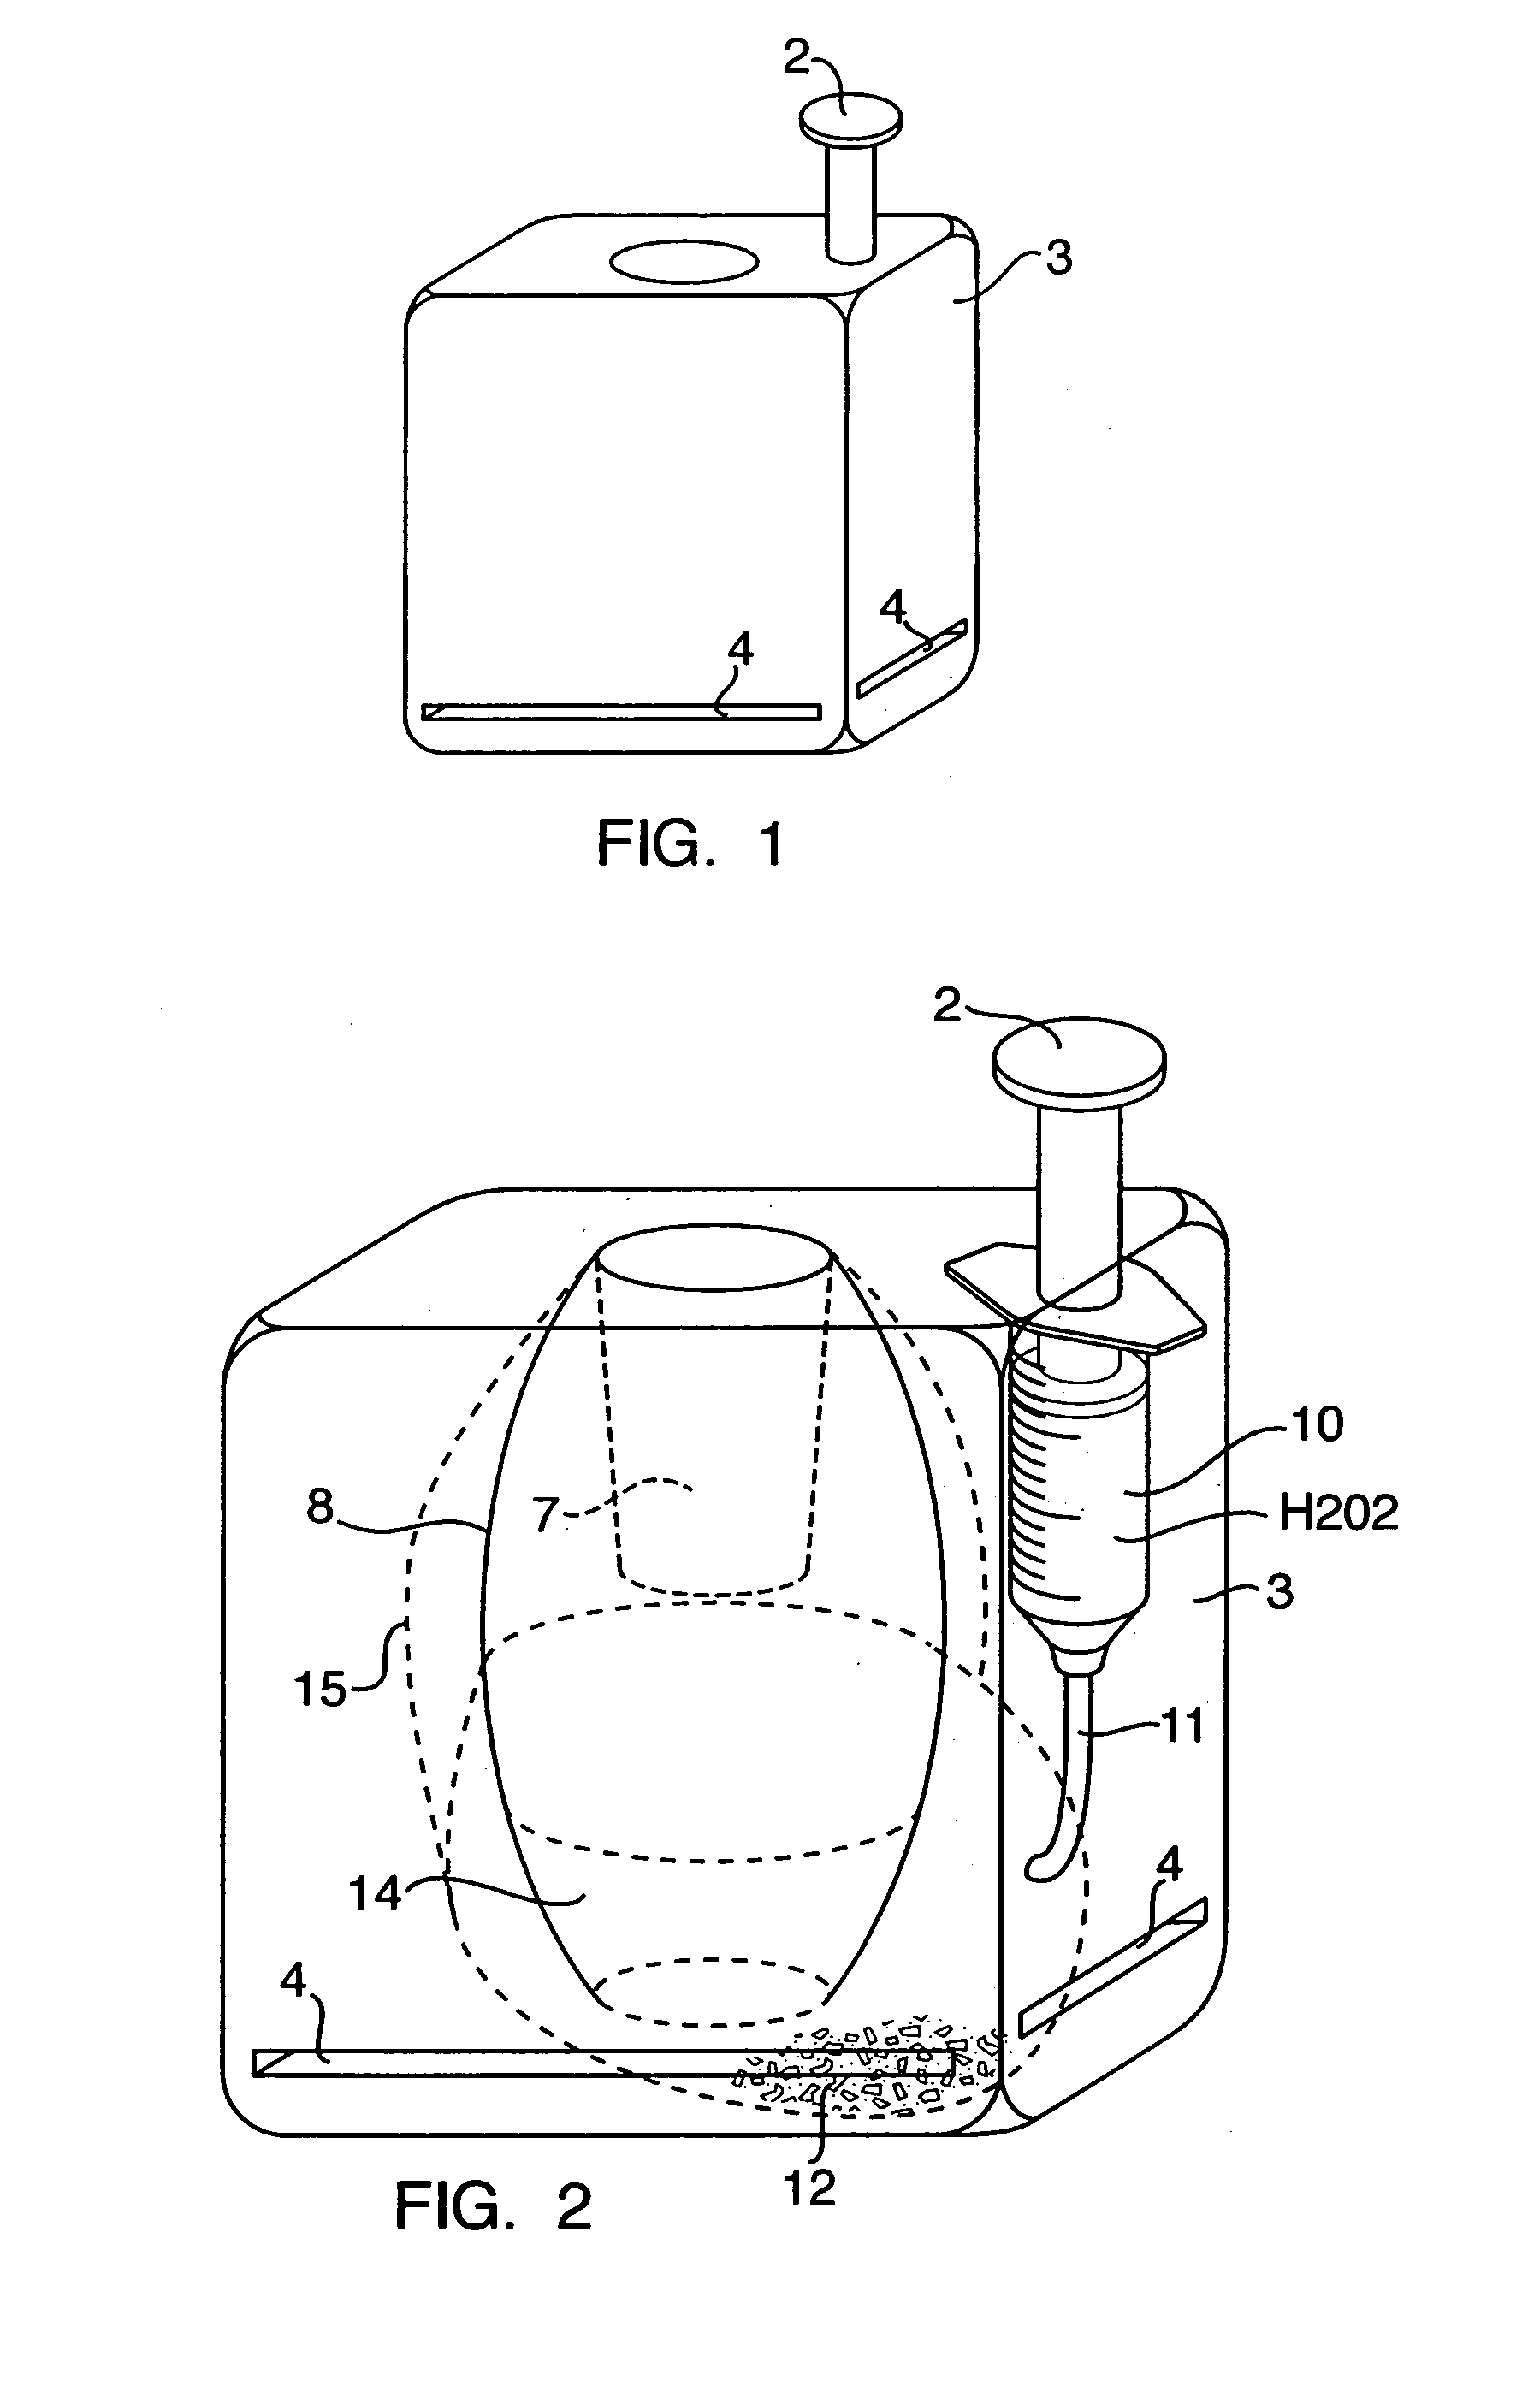 Method and apparatus for heating sterile solutions during medical procedures